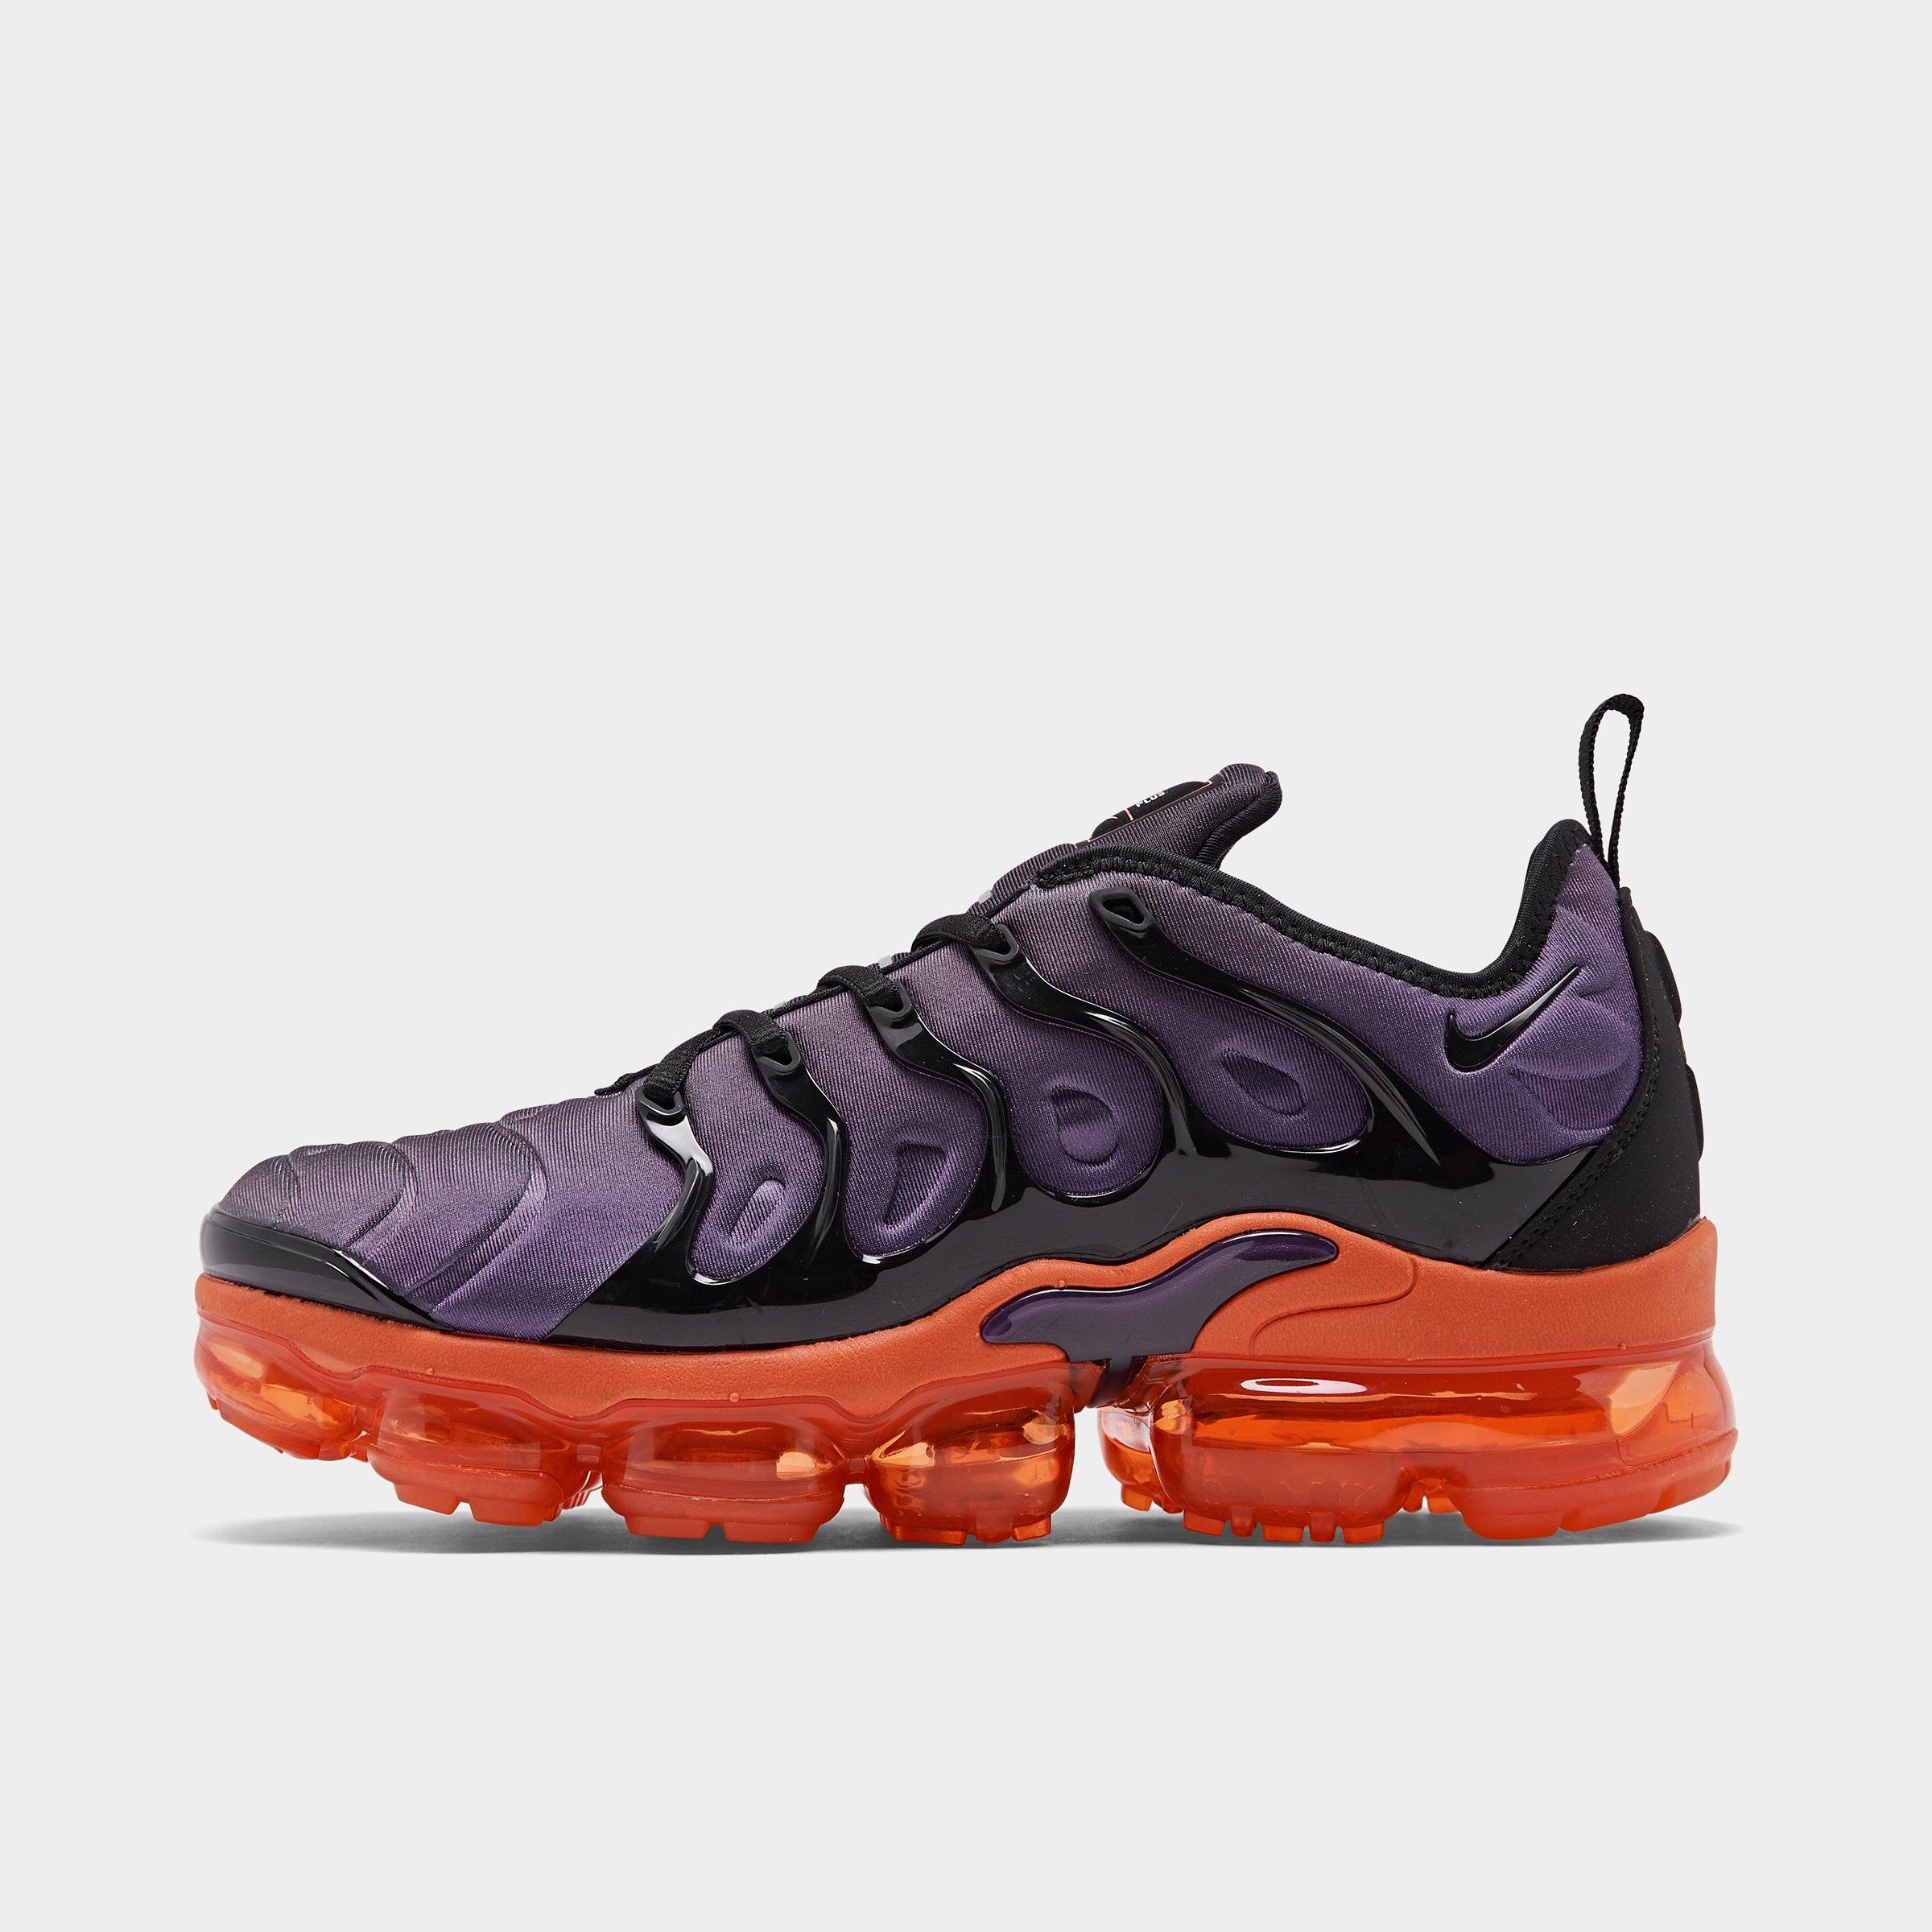 Nike Air Vapormax Plus Shoes For Black Men from Nike